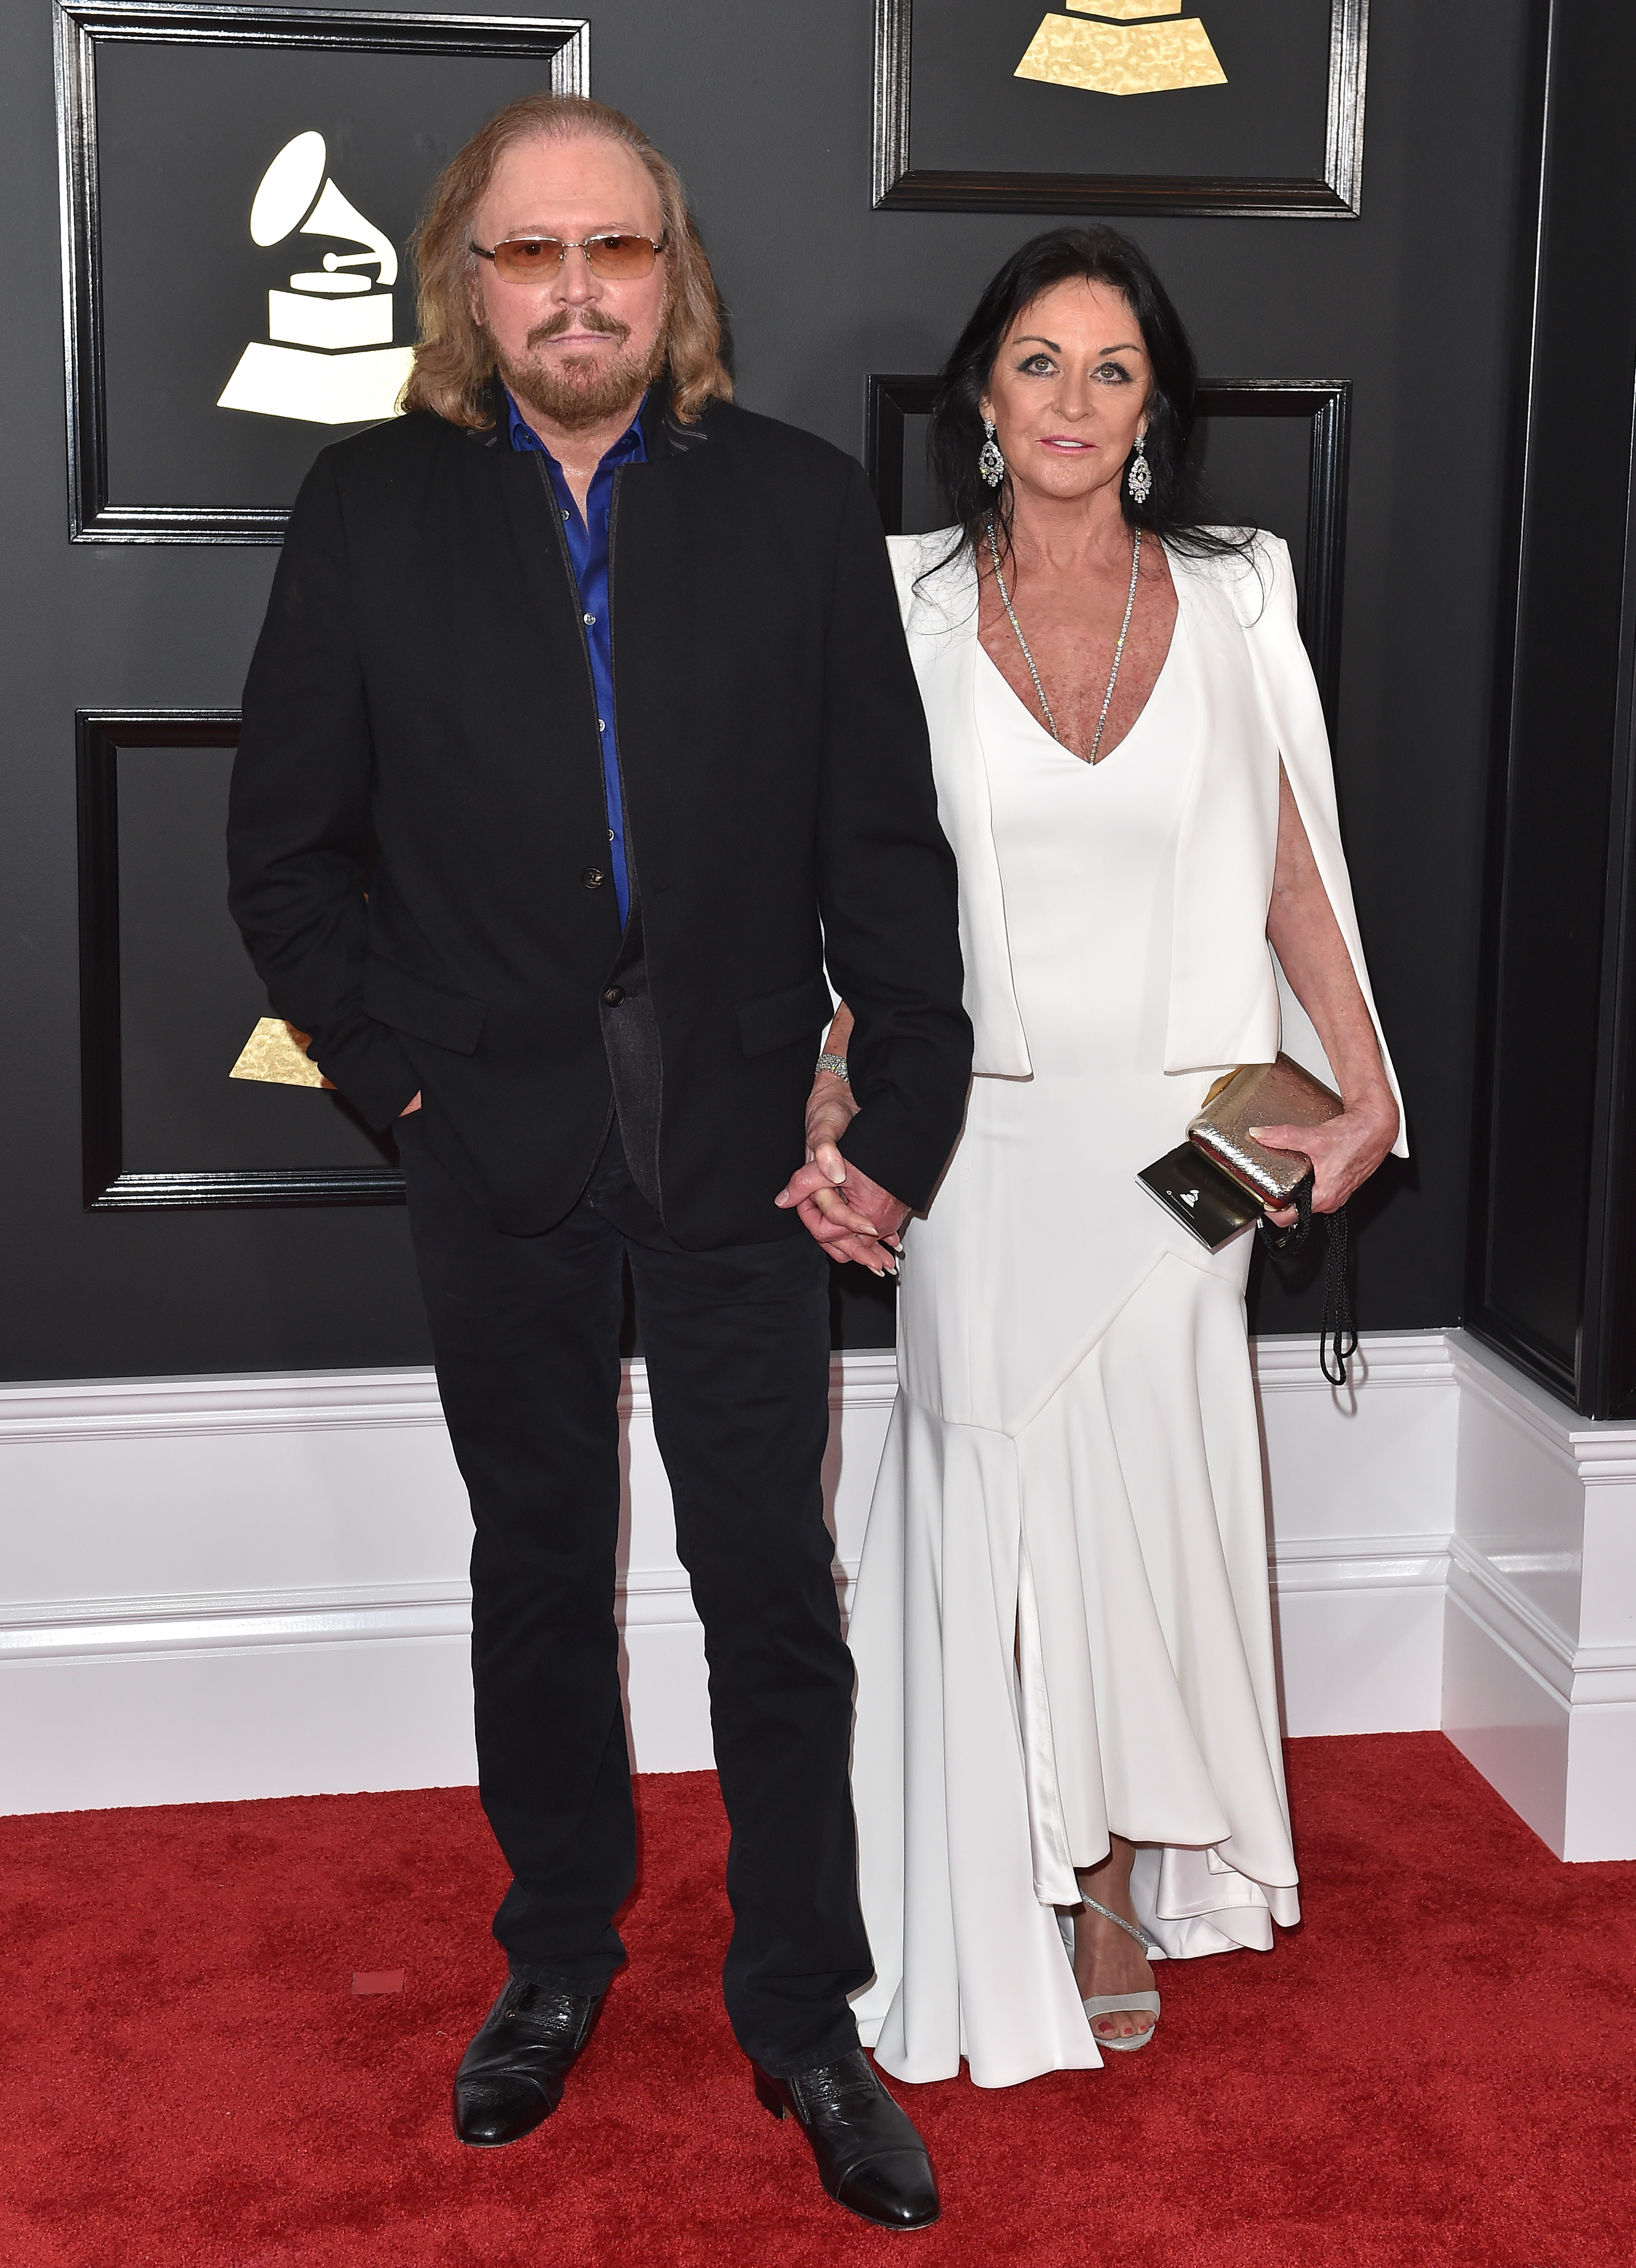 Barry Gibb and Linda Gray at the 59th Grammy Awards in Los Angeles, 2017 | Source: Getty Images